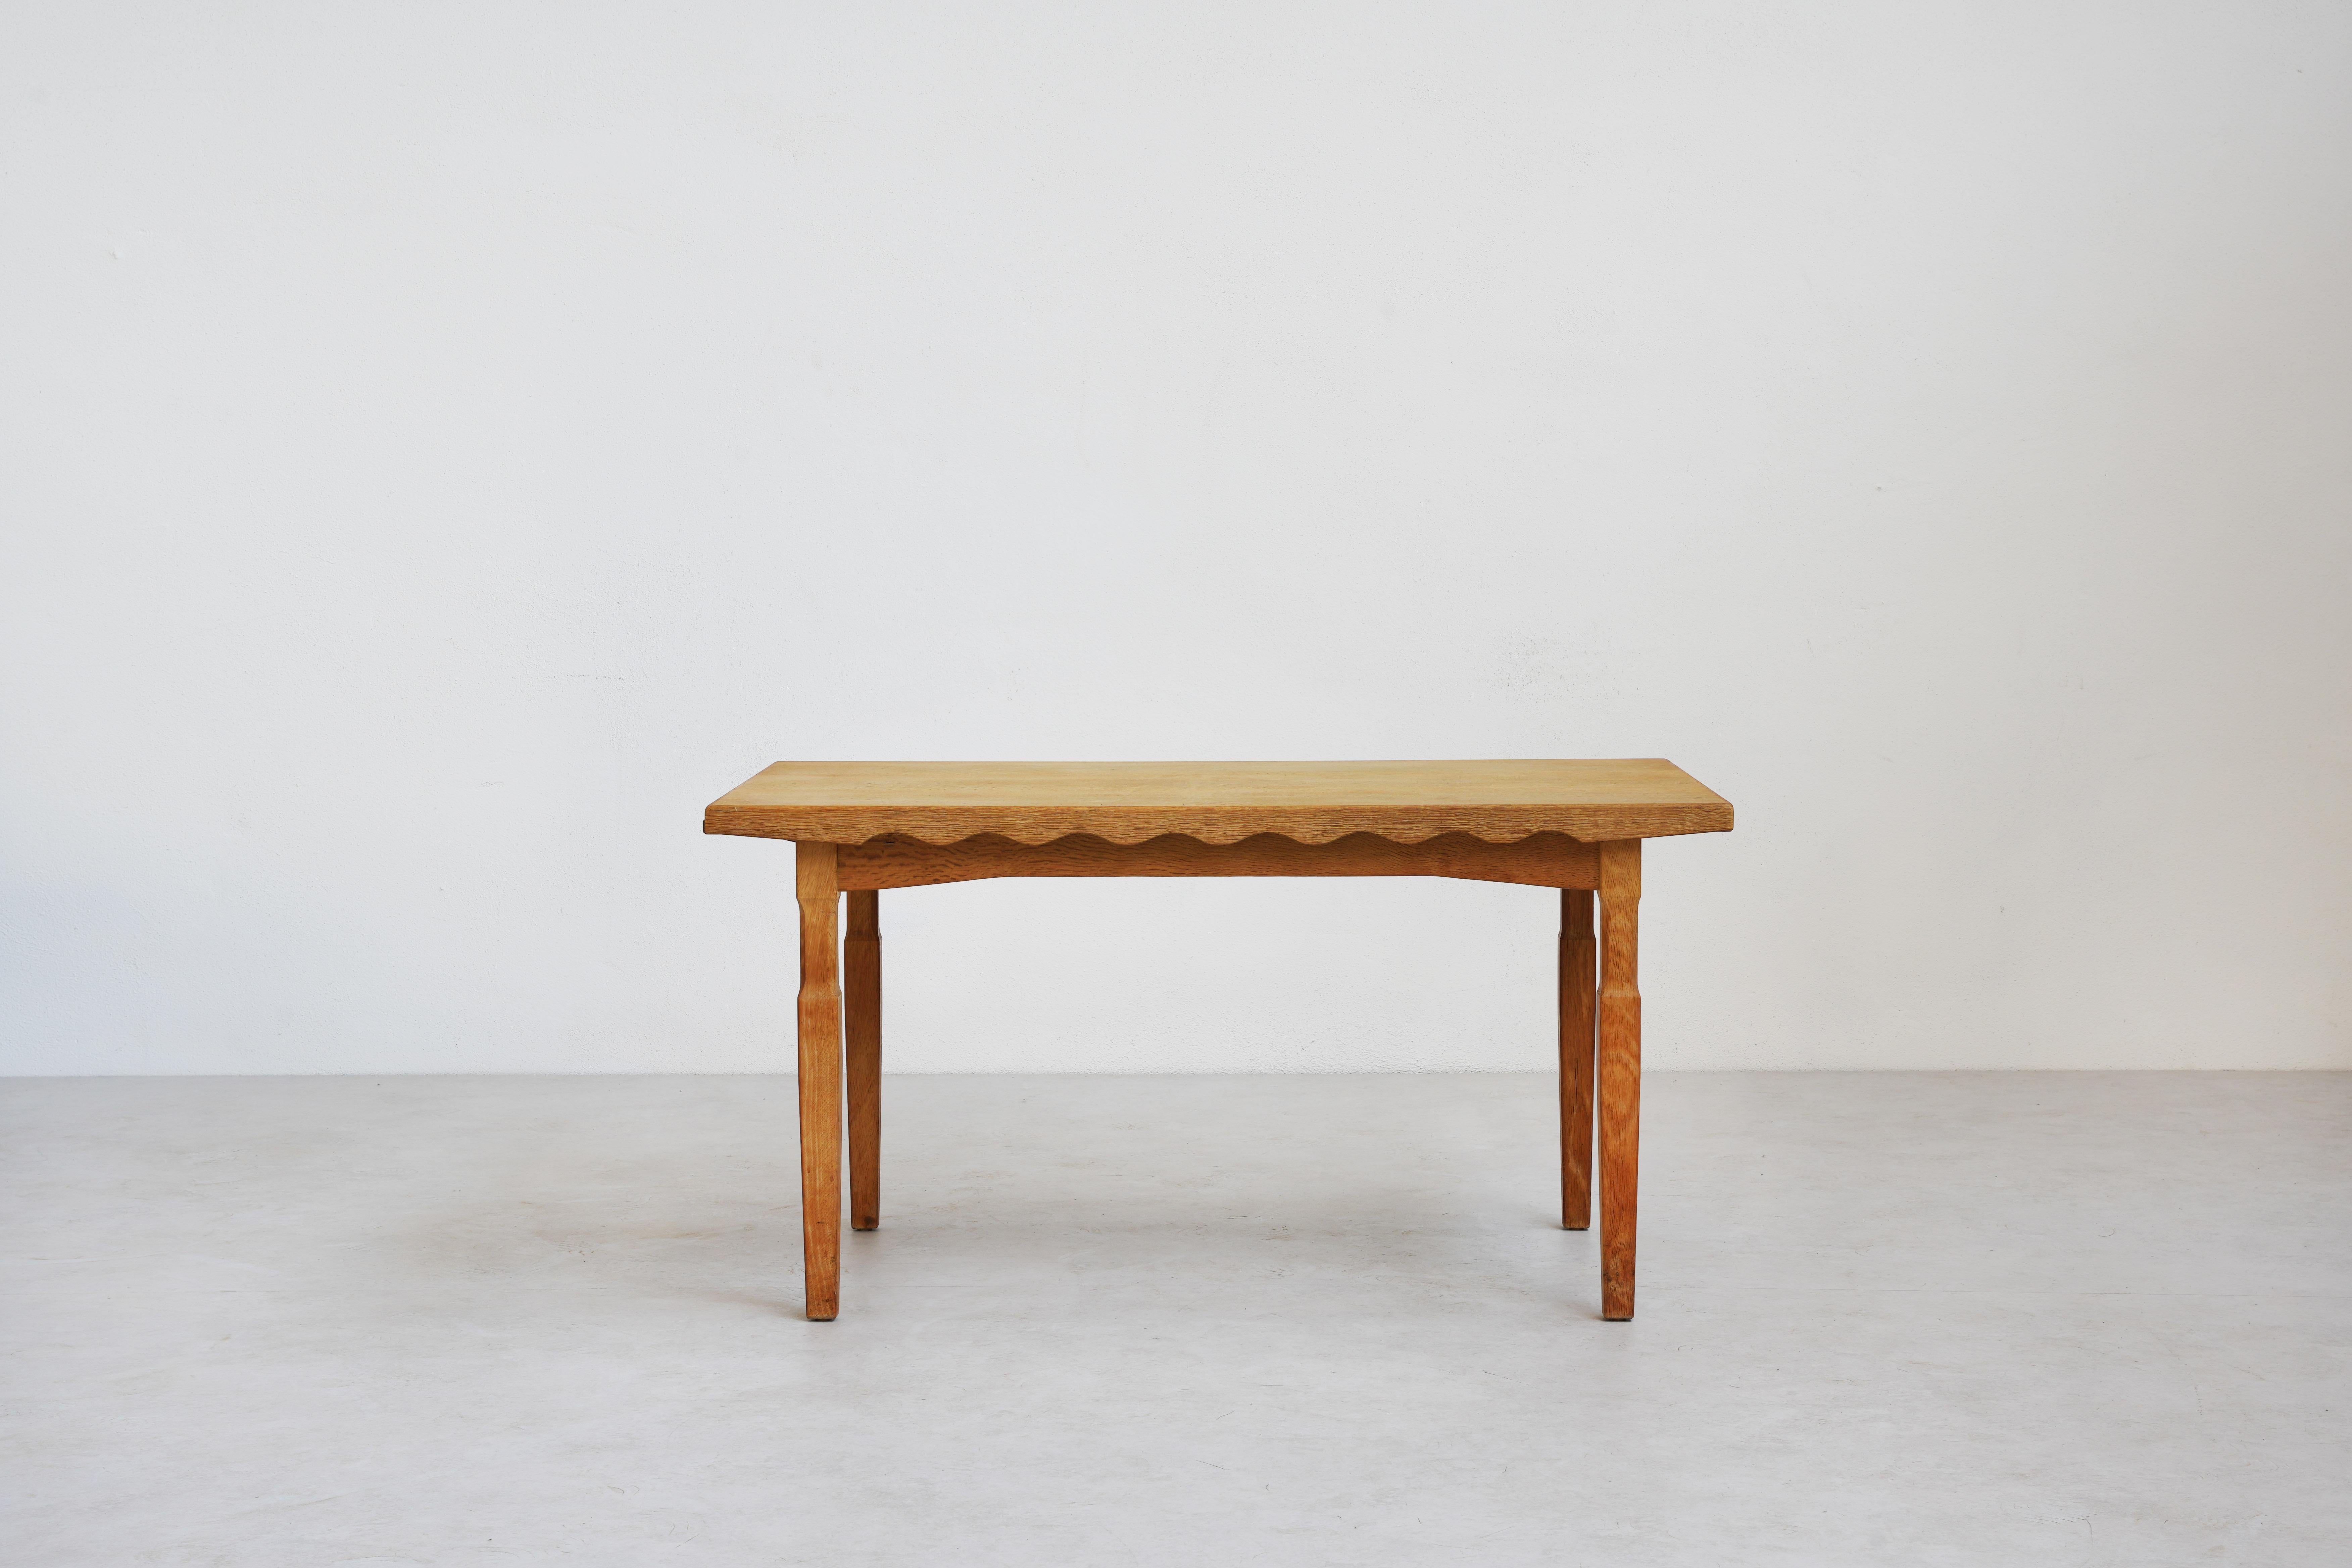 This exquisite dining table, crafted from high-quality oak, showcases the exceptional design vision of Henning Kjærnulf, a renowned Danish designer. Produced by EG Kvalitetsmøbler in the 1960s, it exemplifies mid-century modern design. The unique